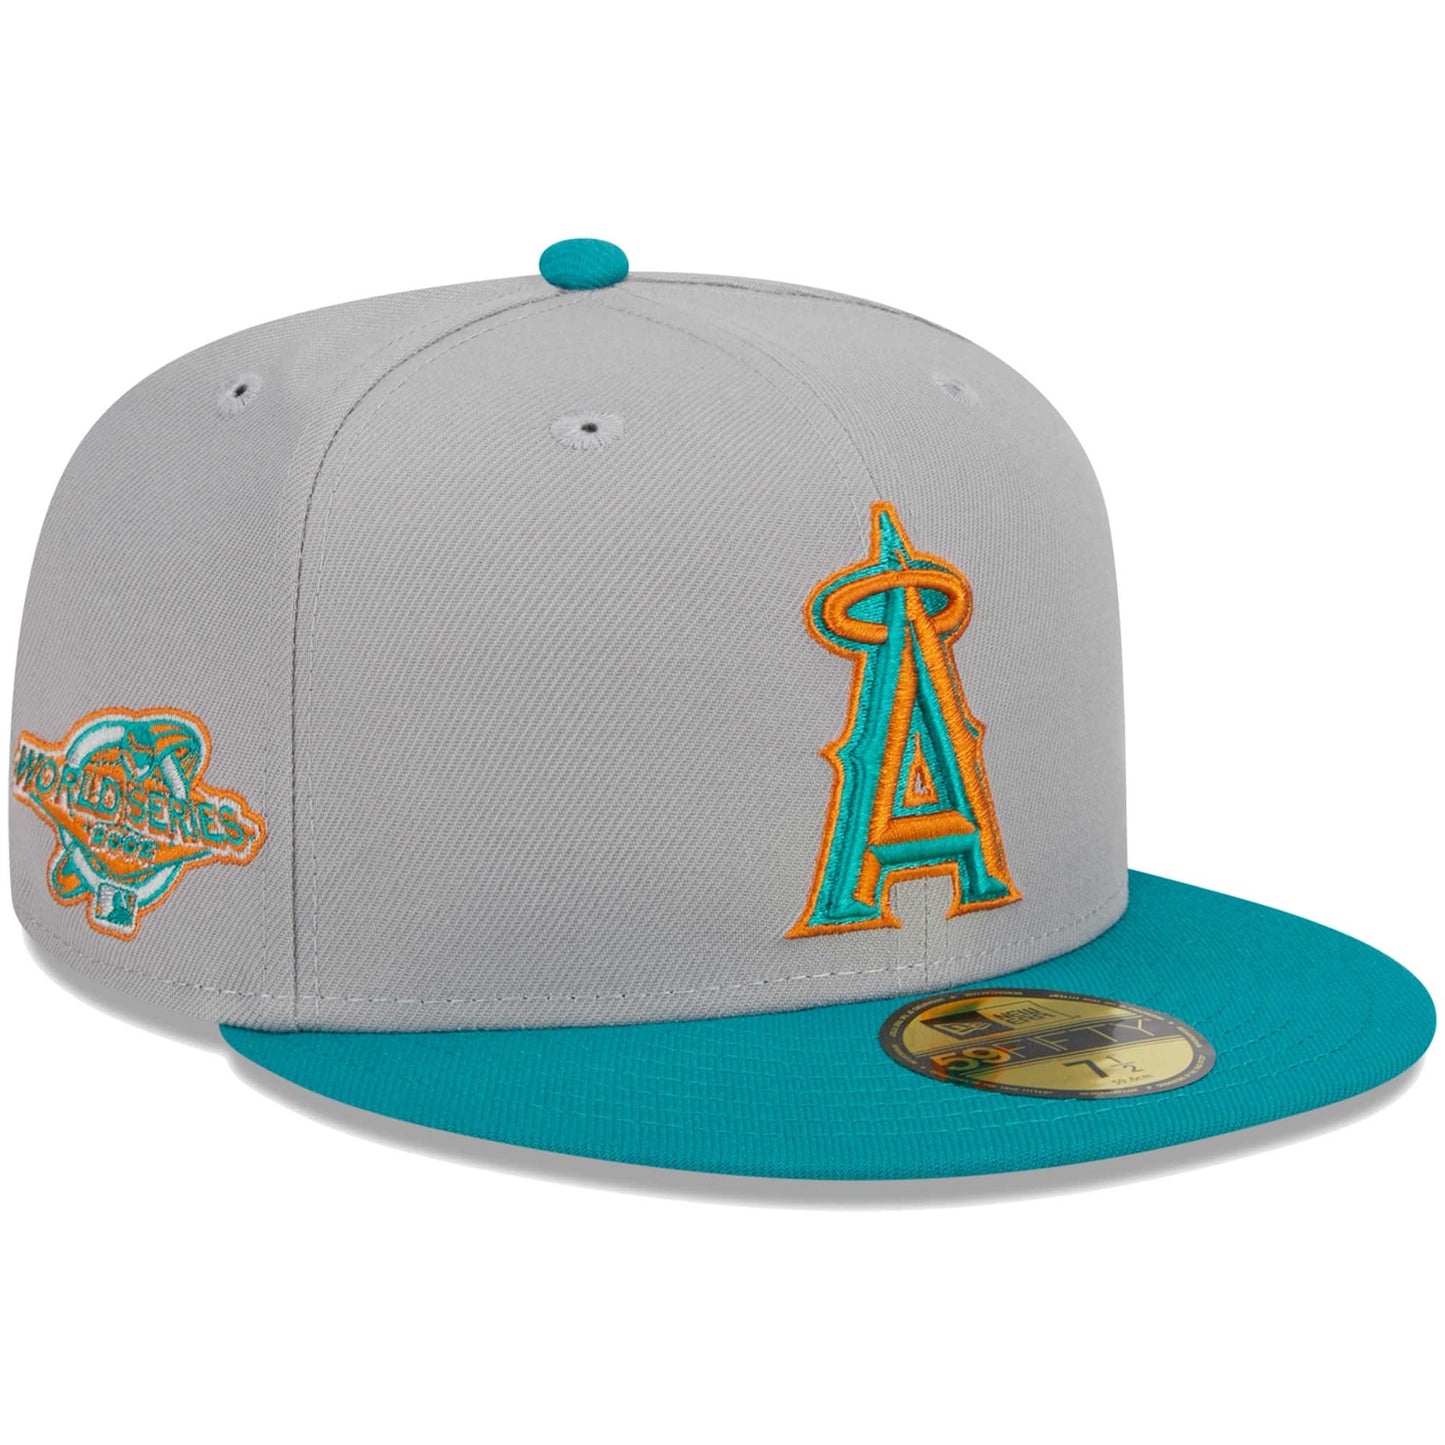 Los Angeles Angels New Era 59FIFTY Fitted Hat - Gray/Teal